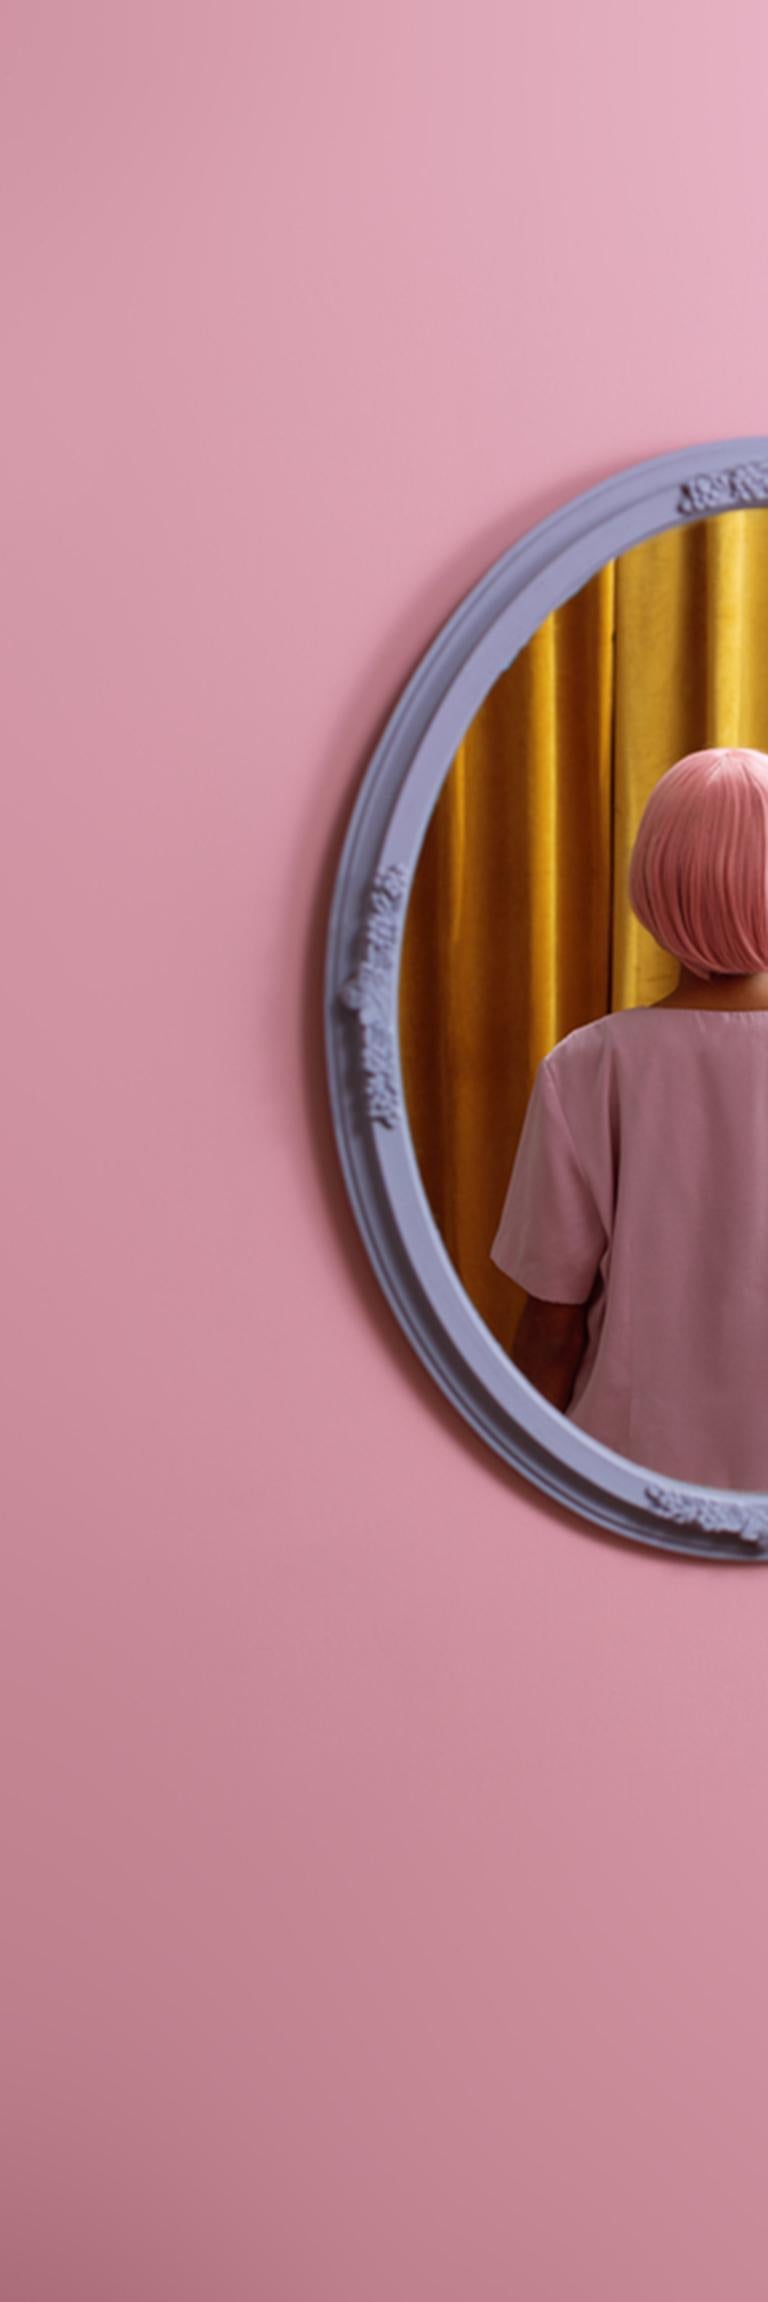 I don't see myself - Abstract pop pink & yellow self-portrait in oval mirror - Photograph by Karen Navarro